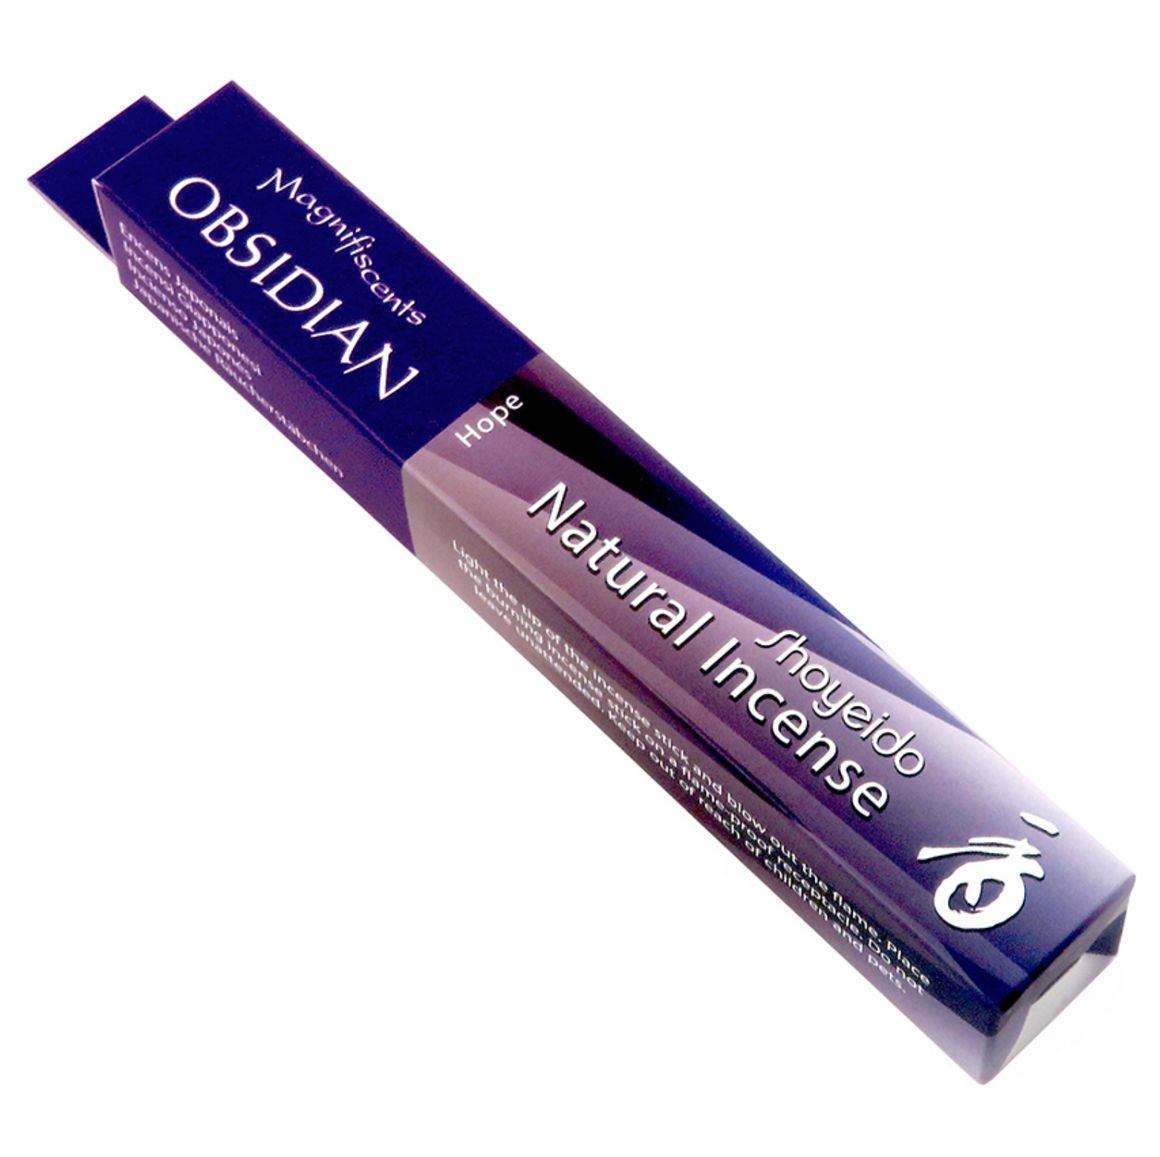 Obsidian (Hope) ~ Magnifiscents The Jewel Series Incense Sticks by Shoyeido